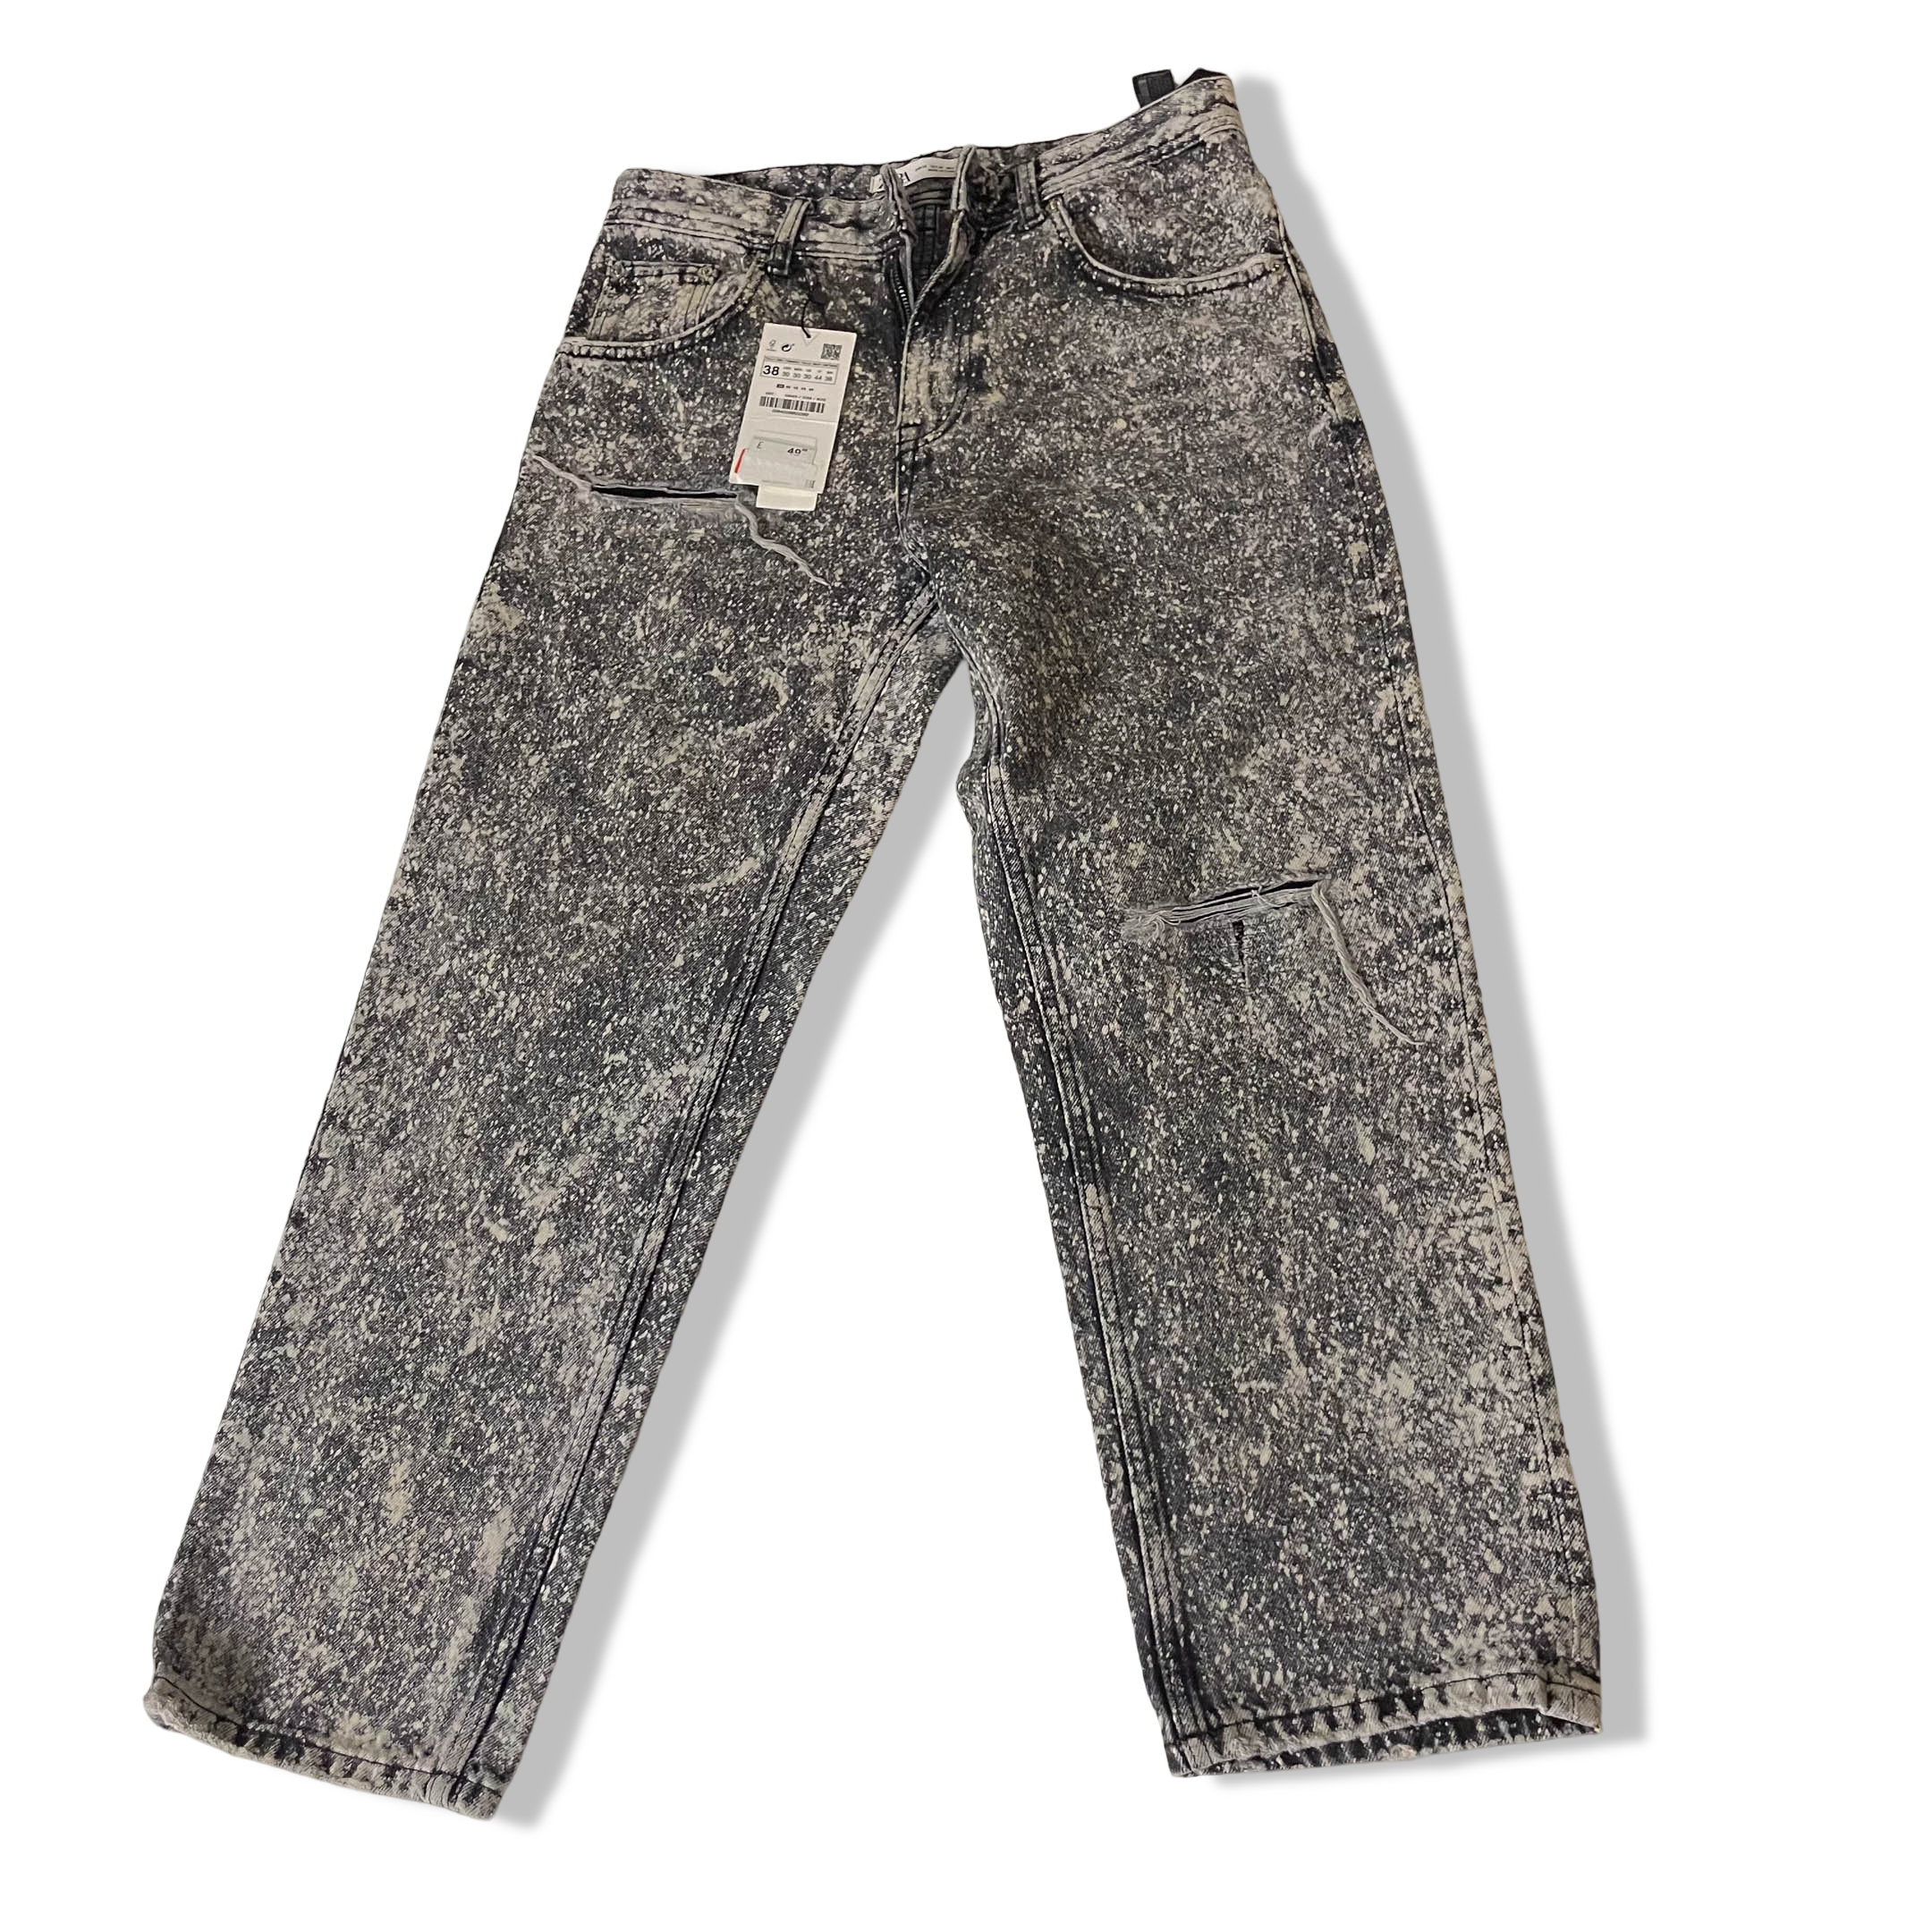 Vintage Zara Grey Acid wash jeans straight leg trouser US 30  with new tag| 3705